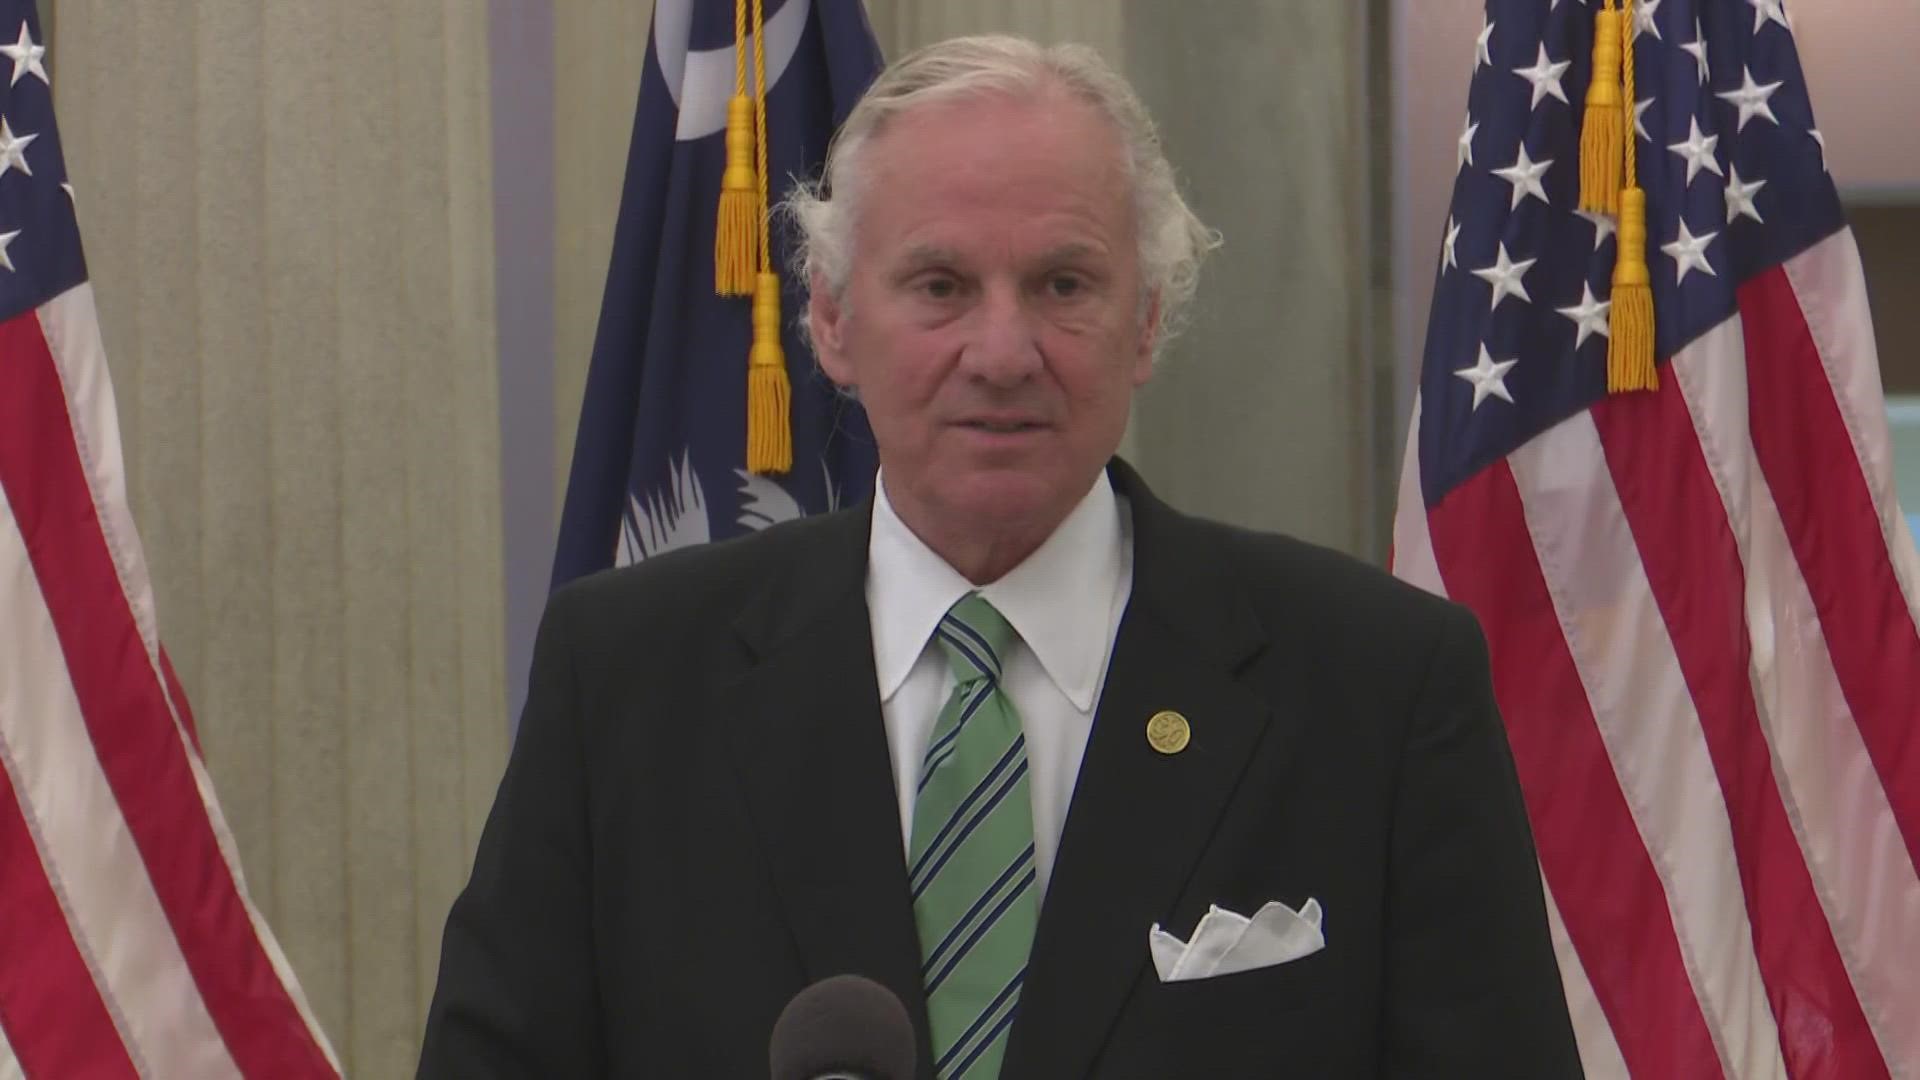 South Carolina Gov. Henry McMaster said masks should not be required in schools for the upcoming year.